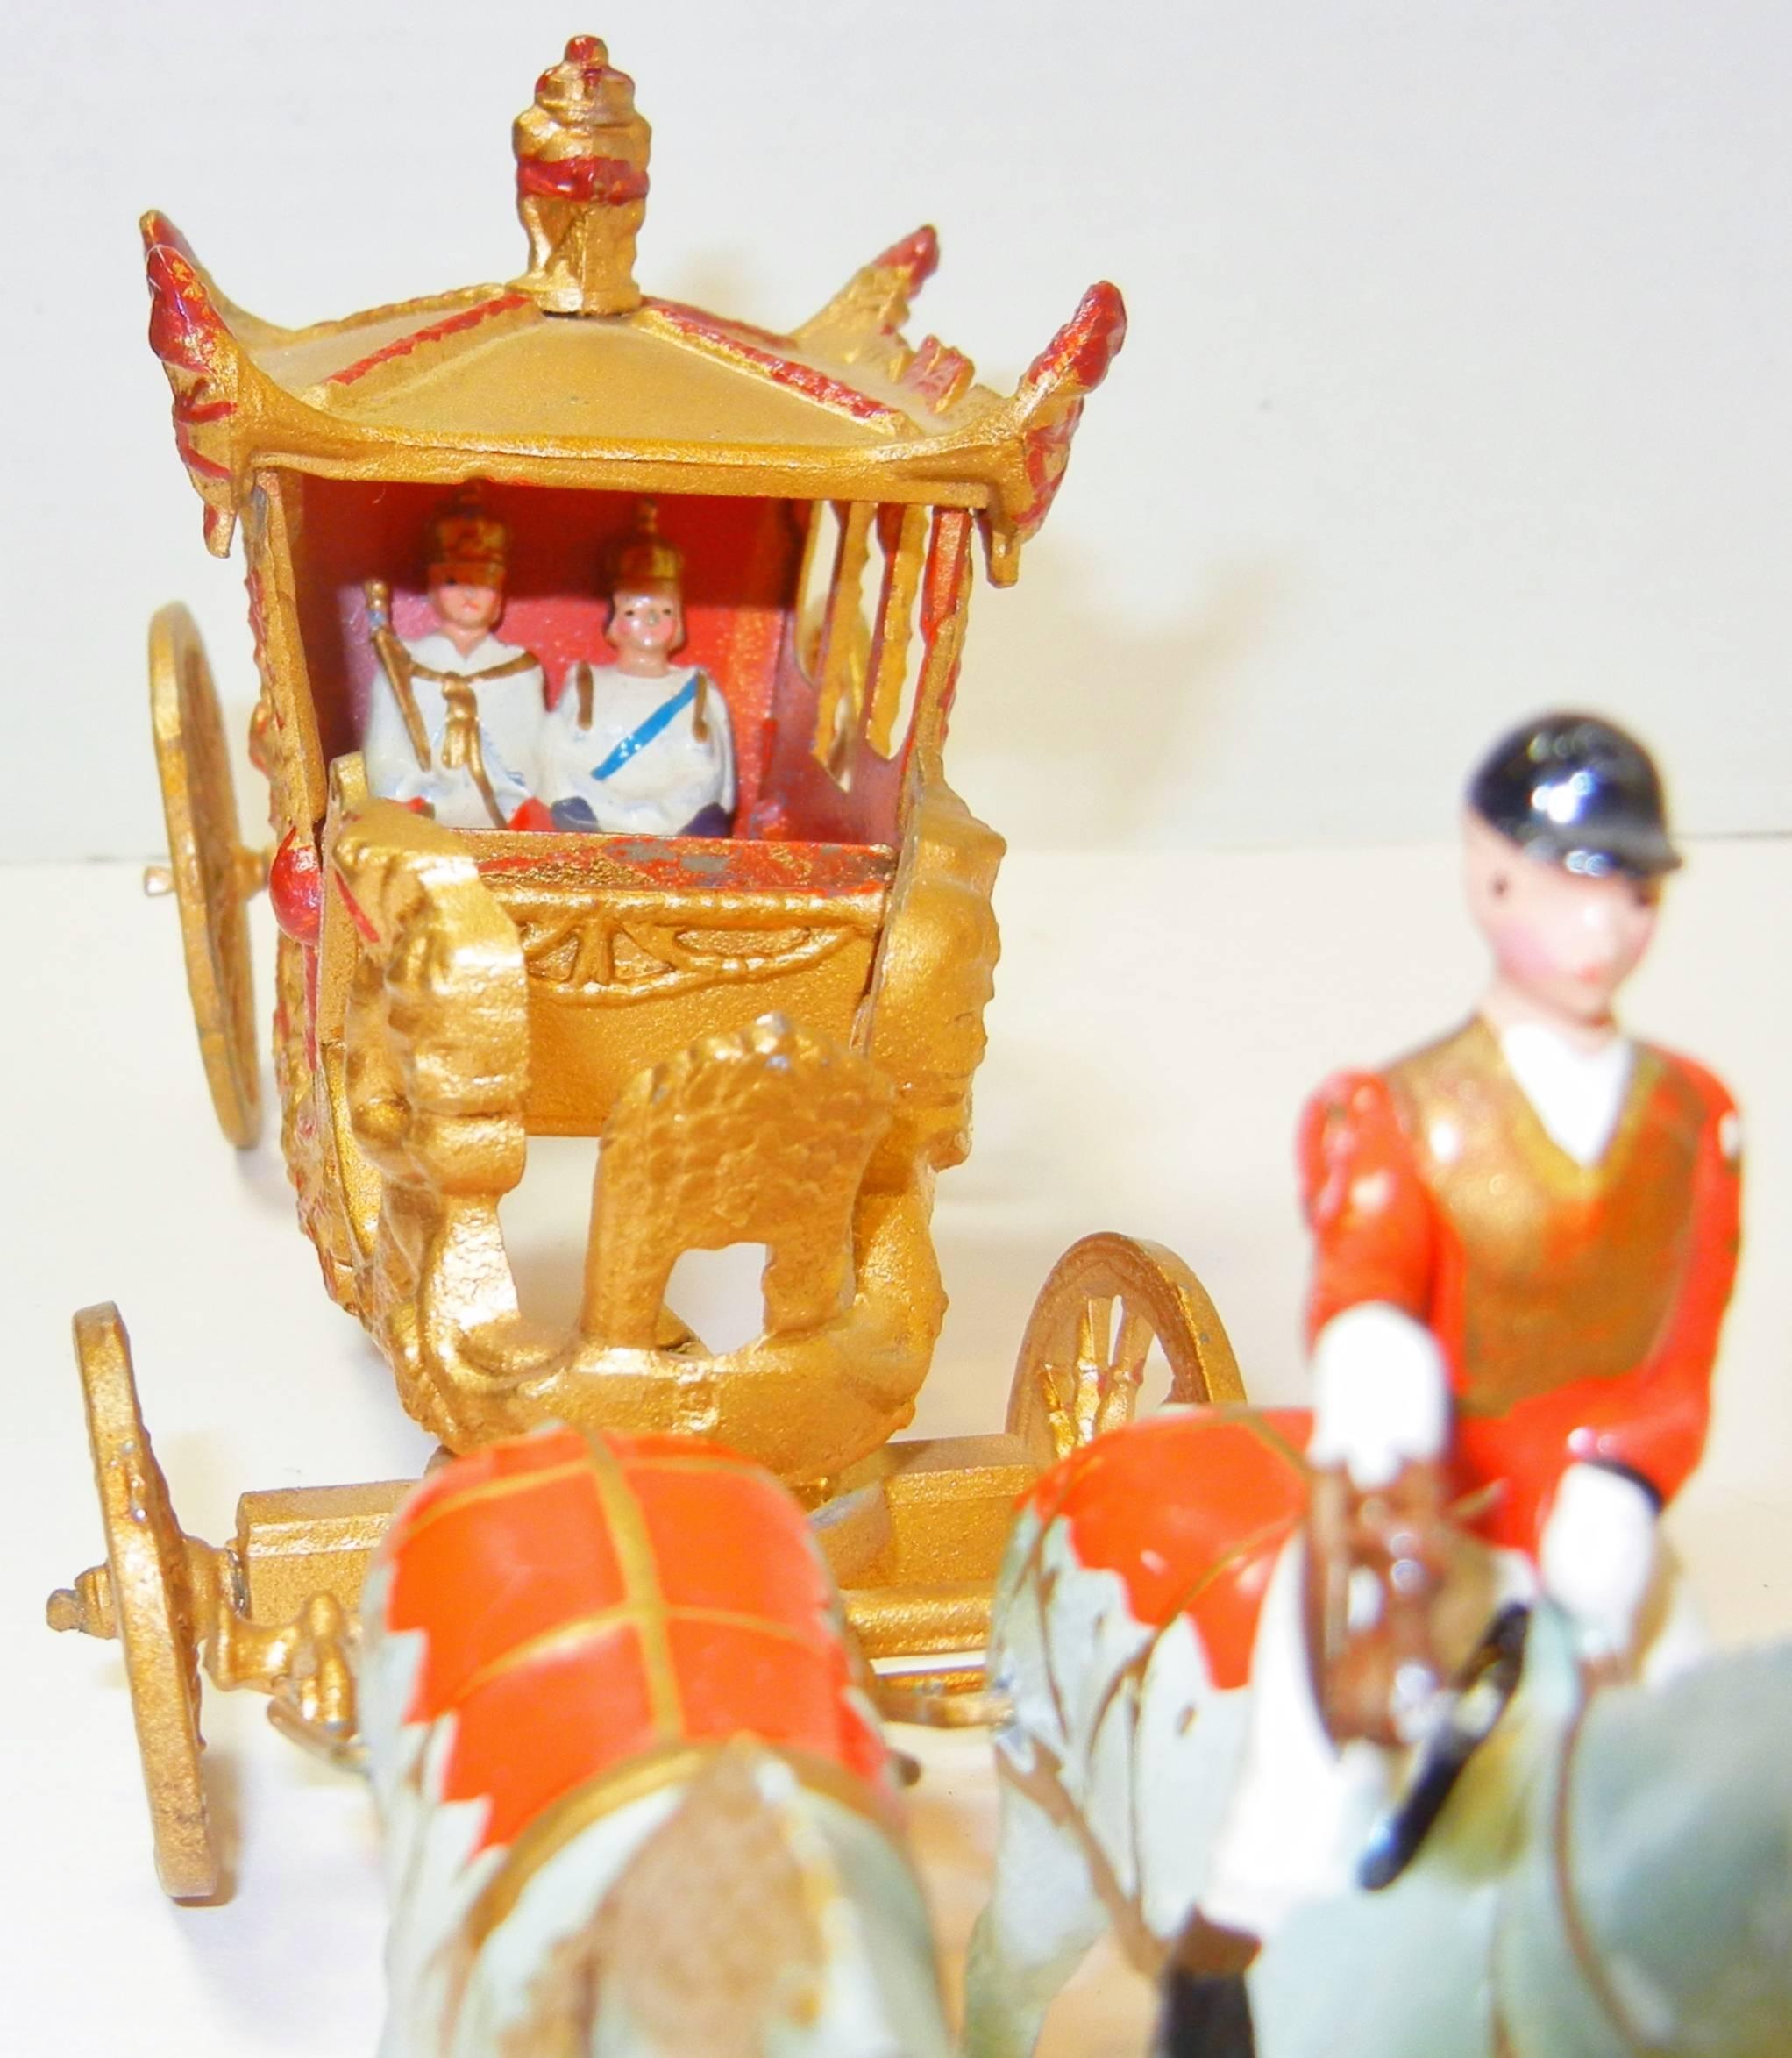 George III George VI Coronation of 1937, Toy State Coach of England by W. Britain Ltd